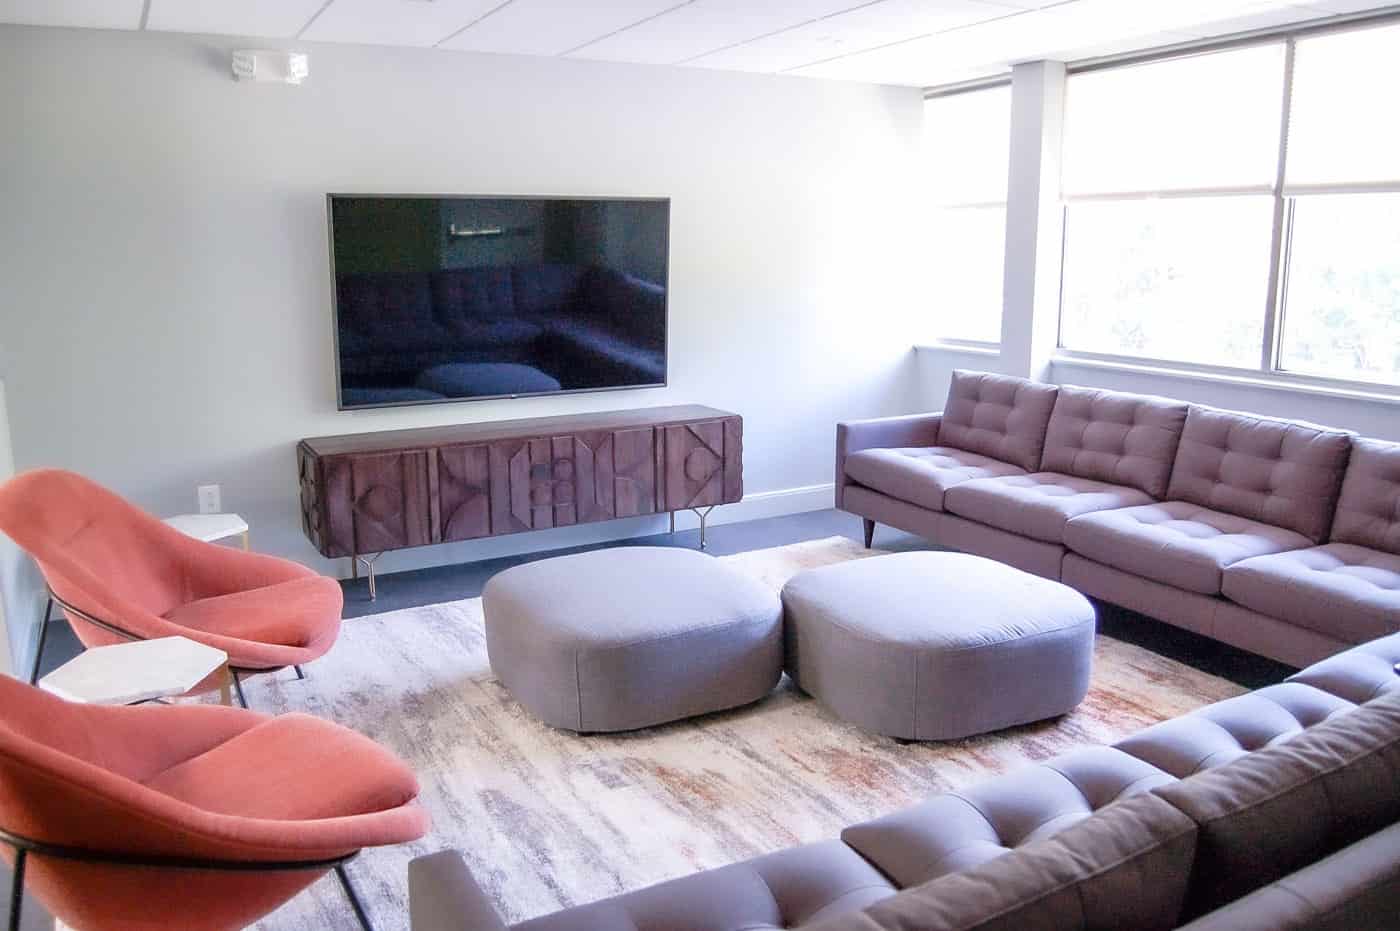 Princeton Detox and Recovery Group Lounge and Metting Room